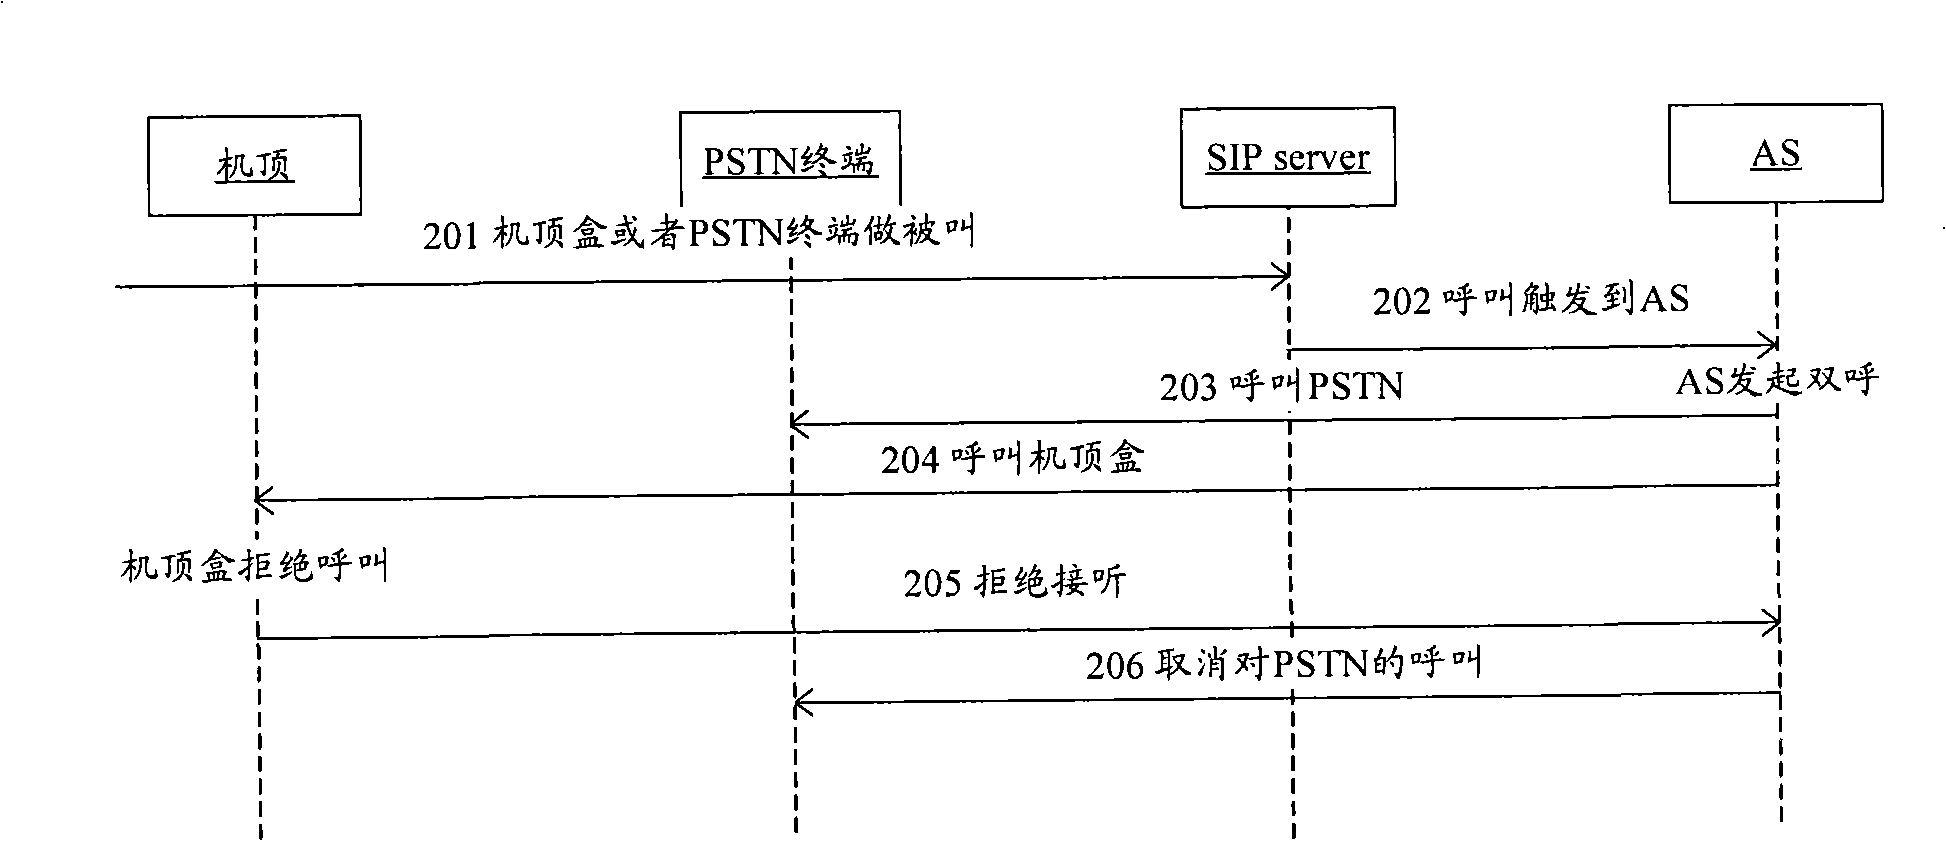 Method and apparatus for implementing call business based on IPTV, application server